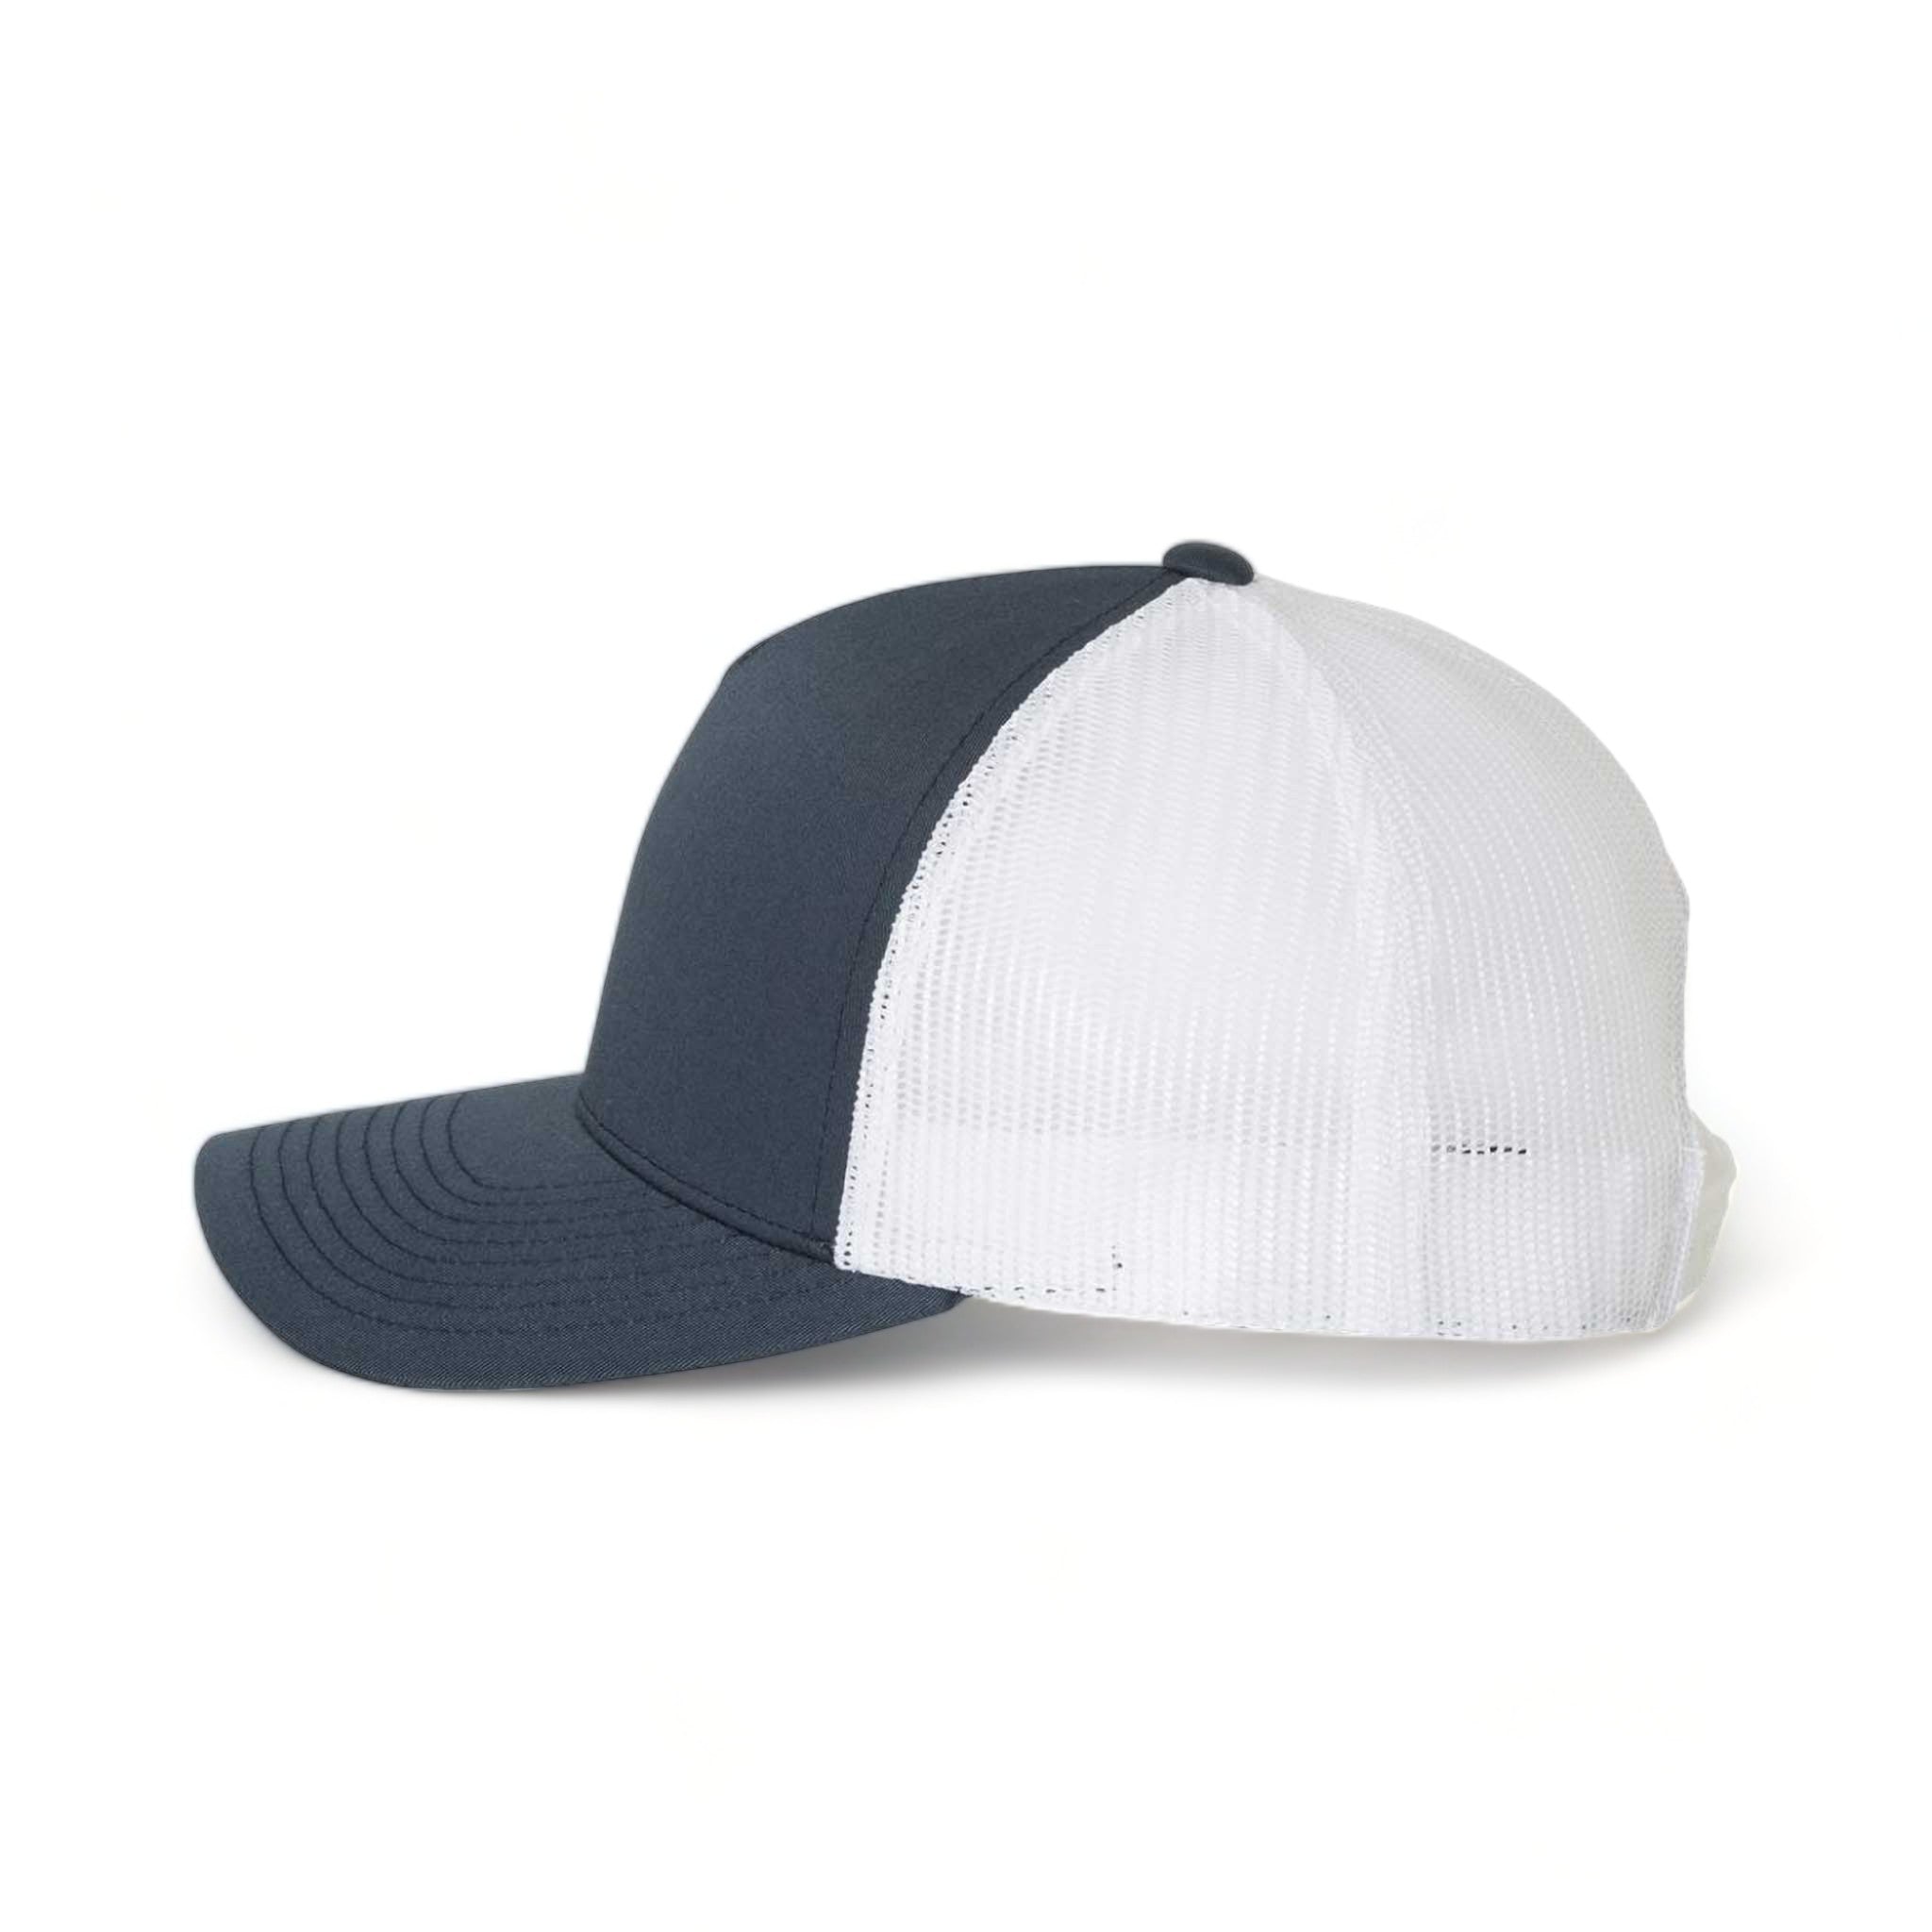 Side view of YP Classics 6506 custom hat in navy and white